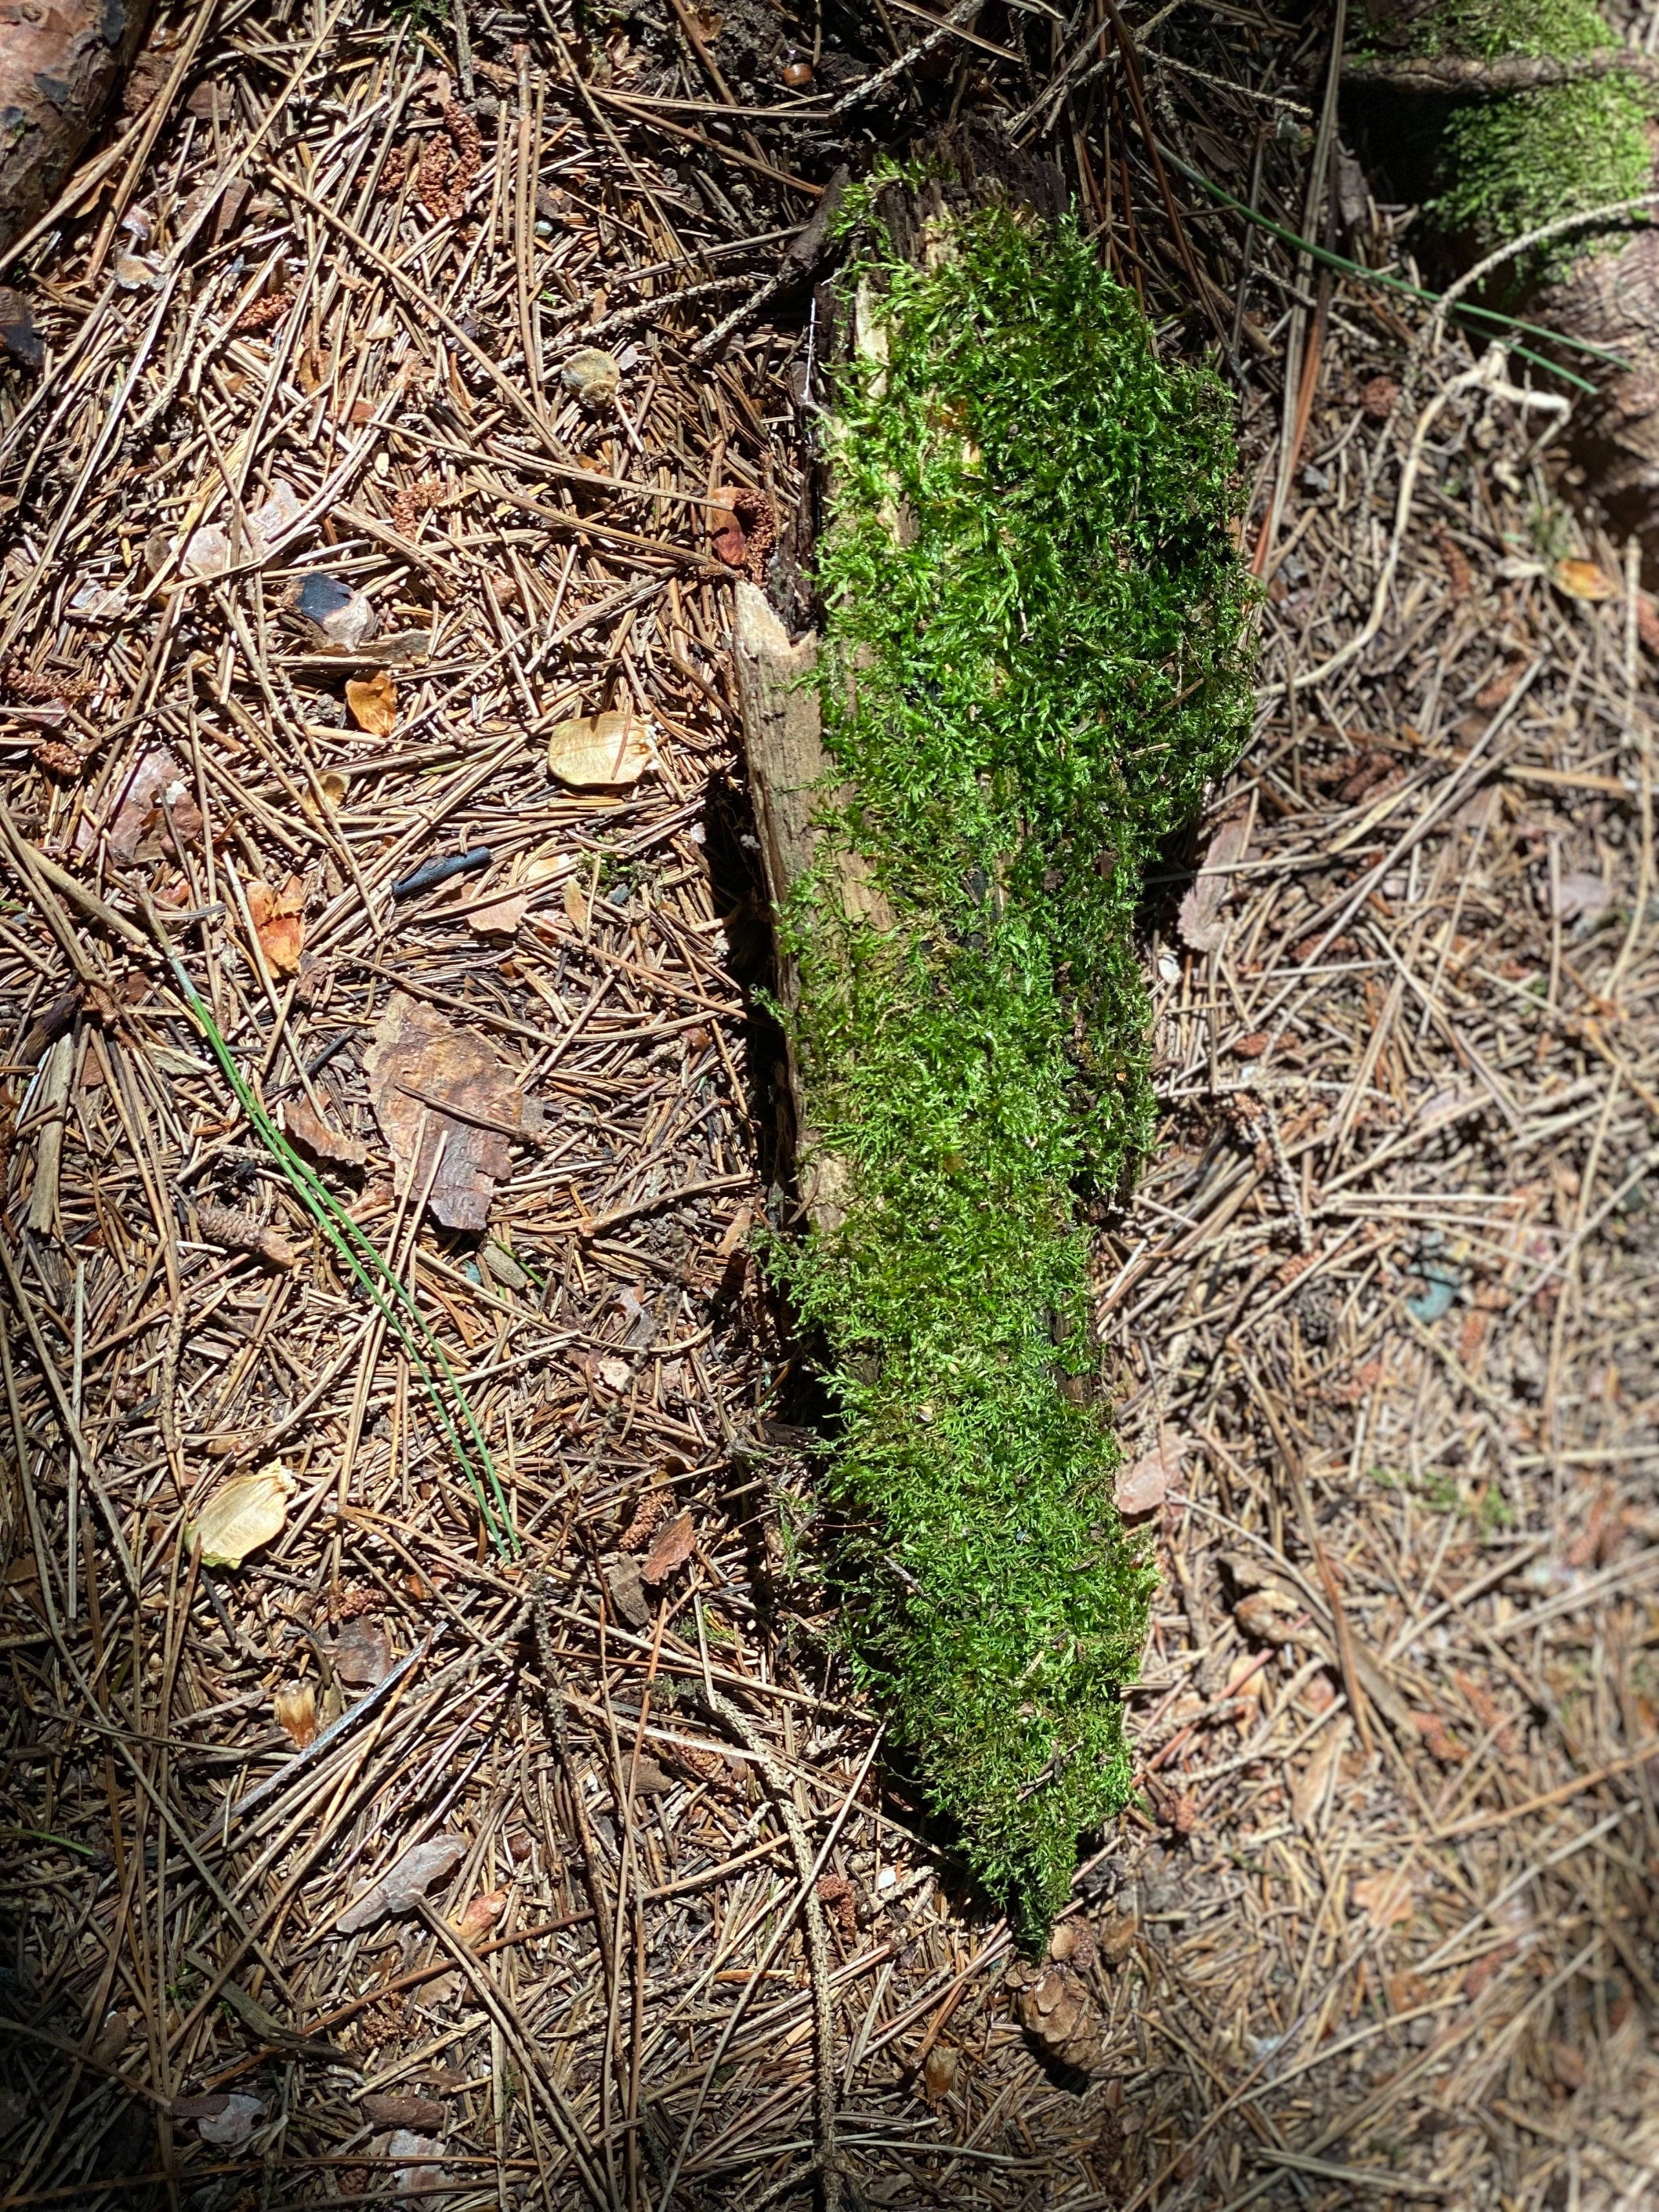 Moss Covered Log, Mossy Log, 12.5 Inches Long by 3.5 Inches Wide and 1.5 Inches High